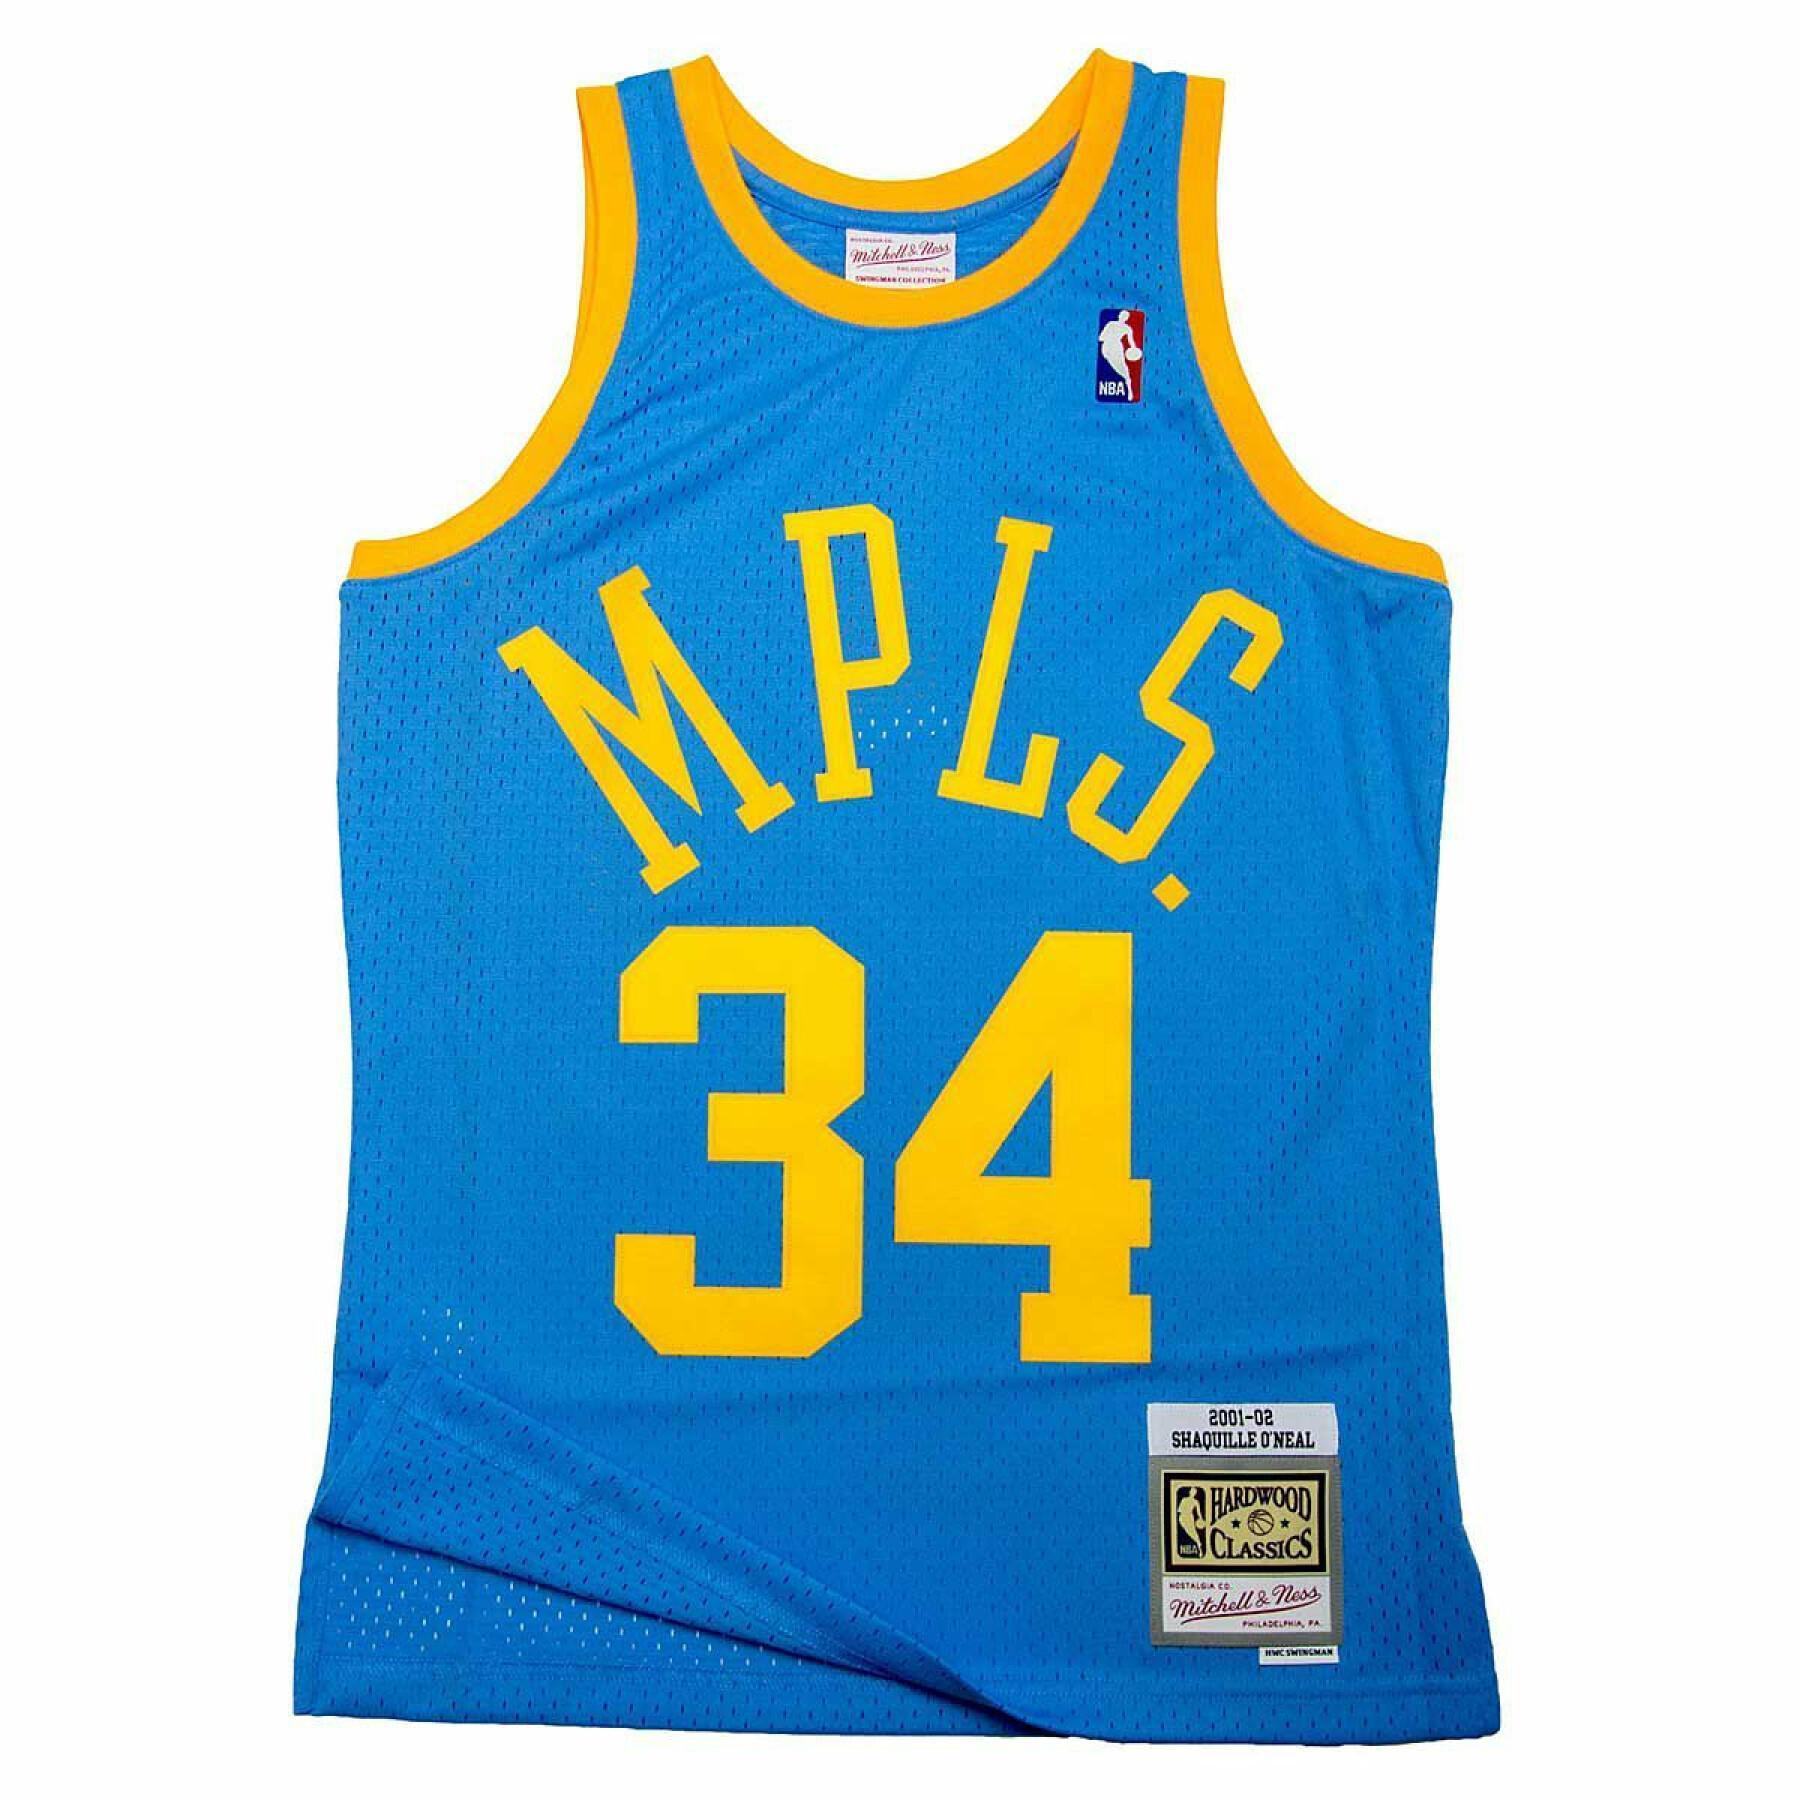 Jersey Los Angeles Lakers Shaquille O'neal